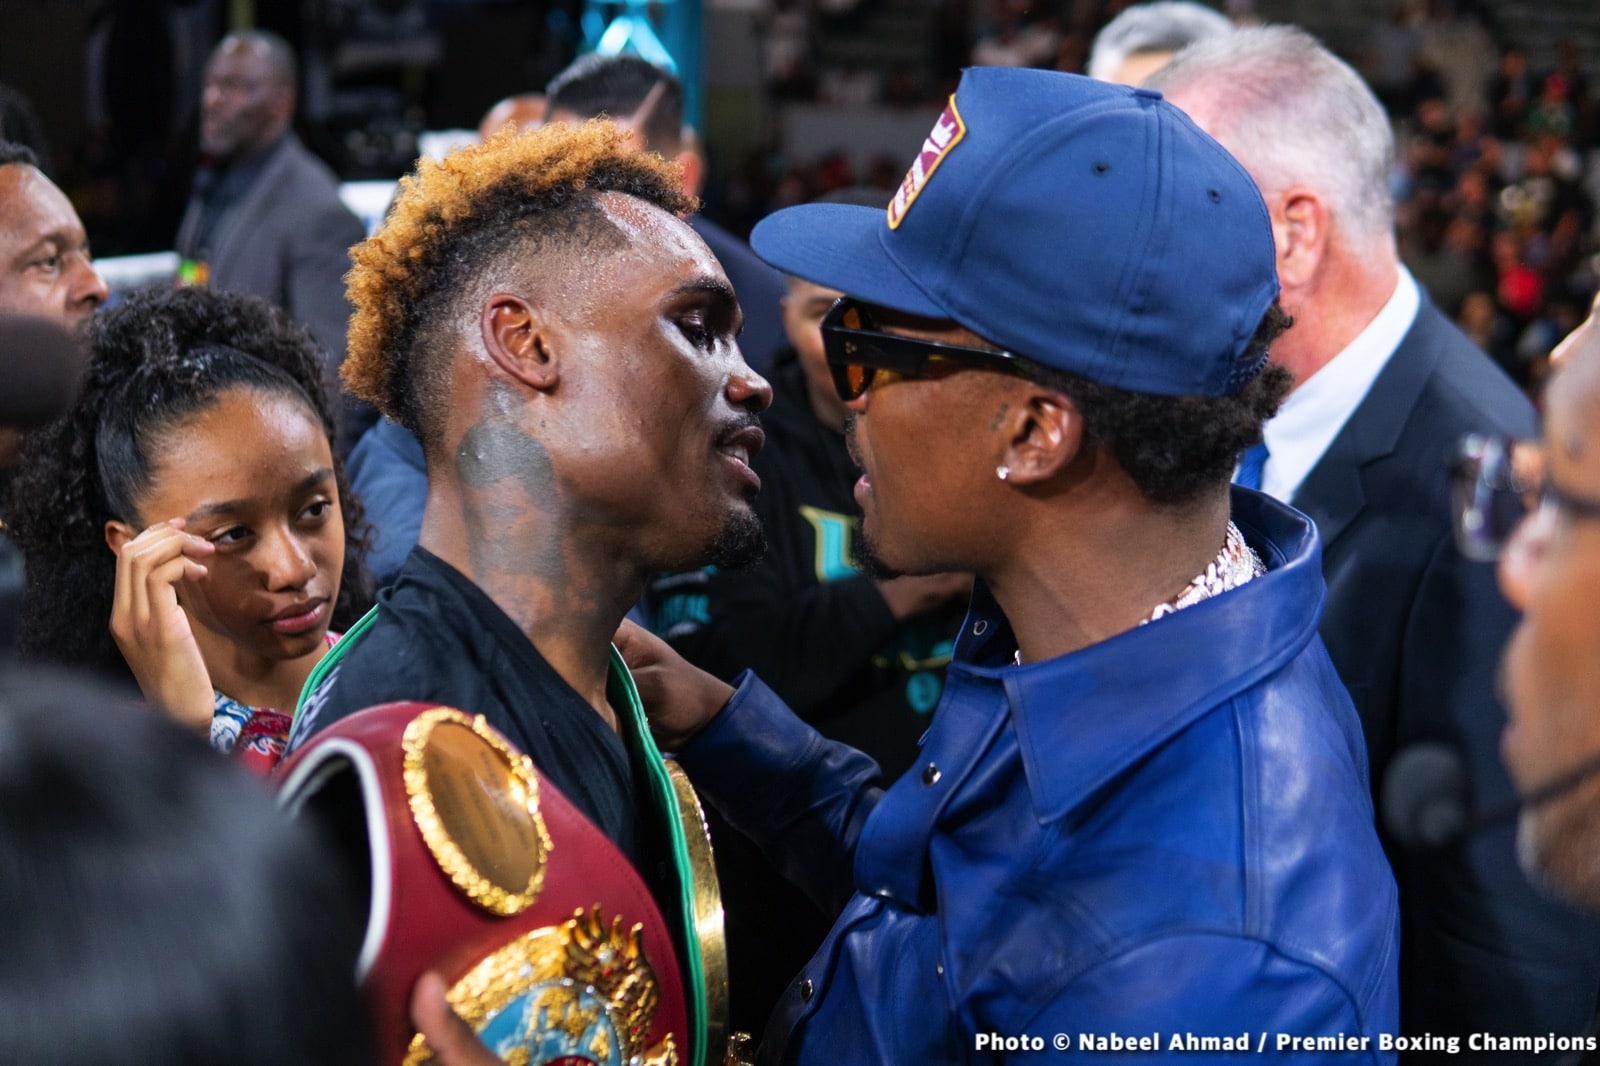 Jermell Charlo stops Brian Castano in 10th - Boxing Results